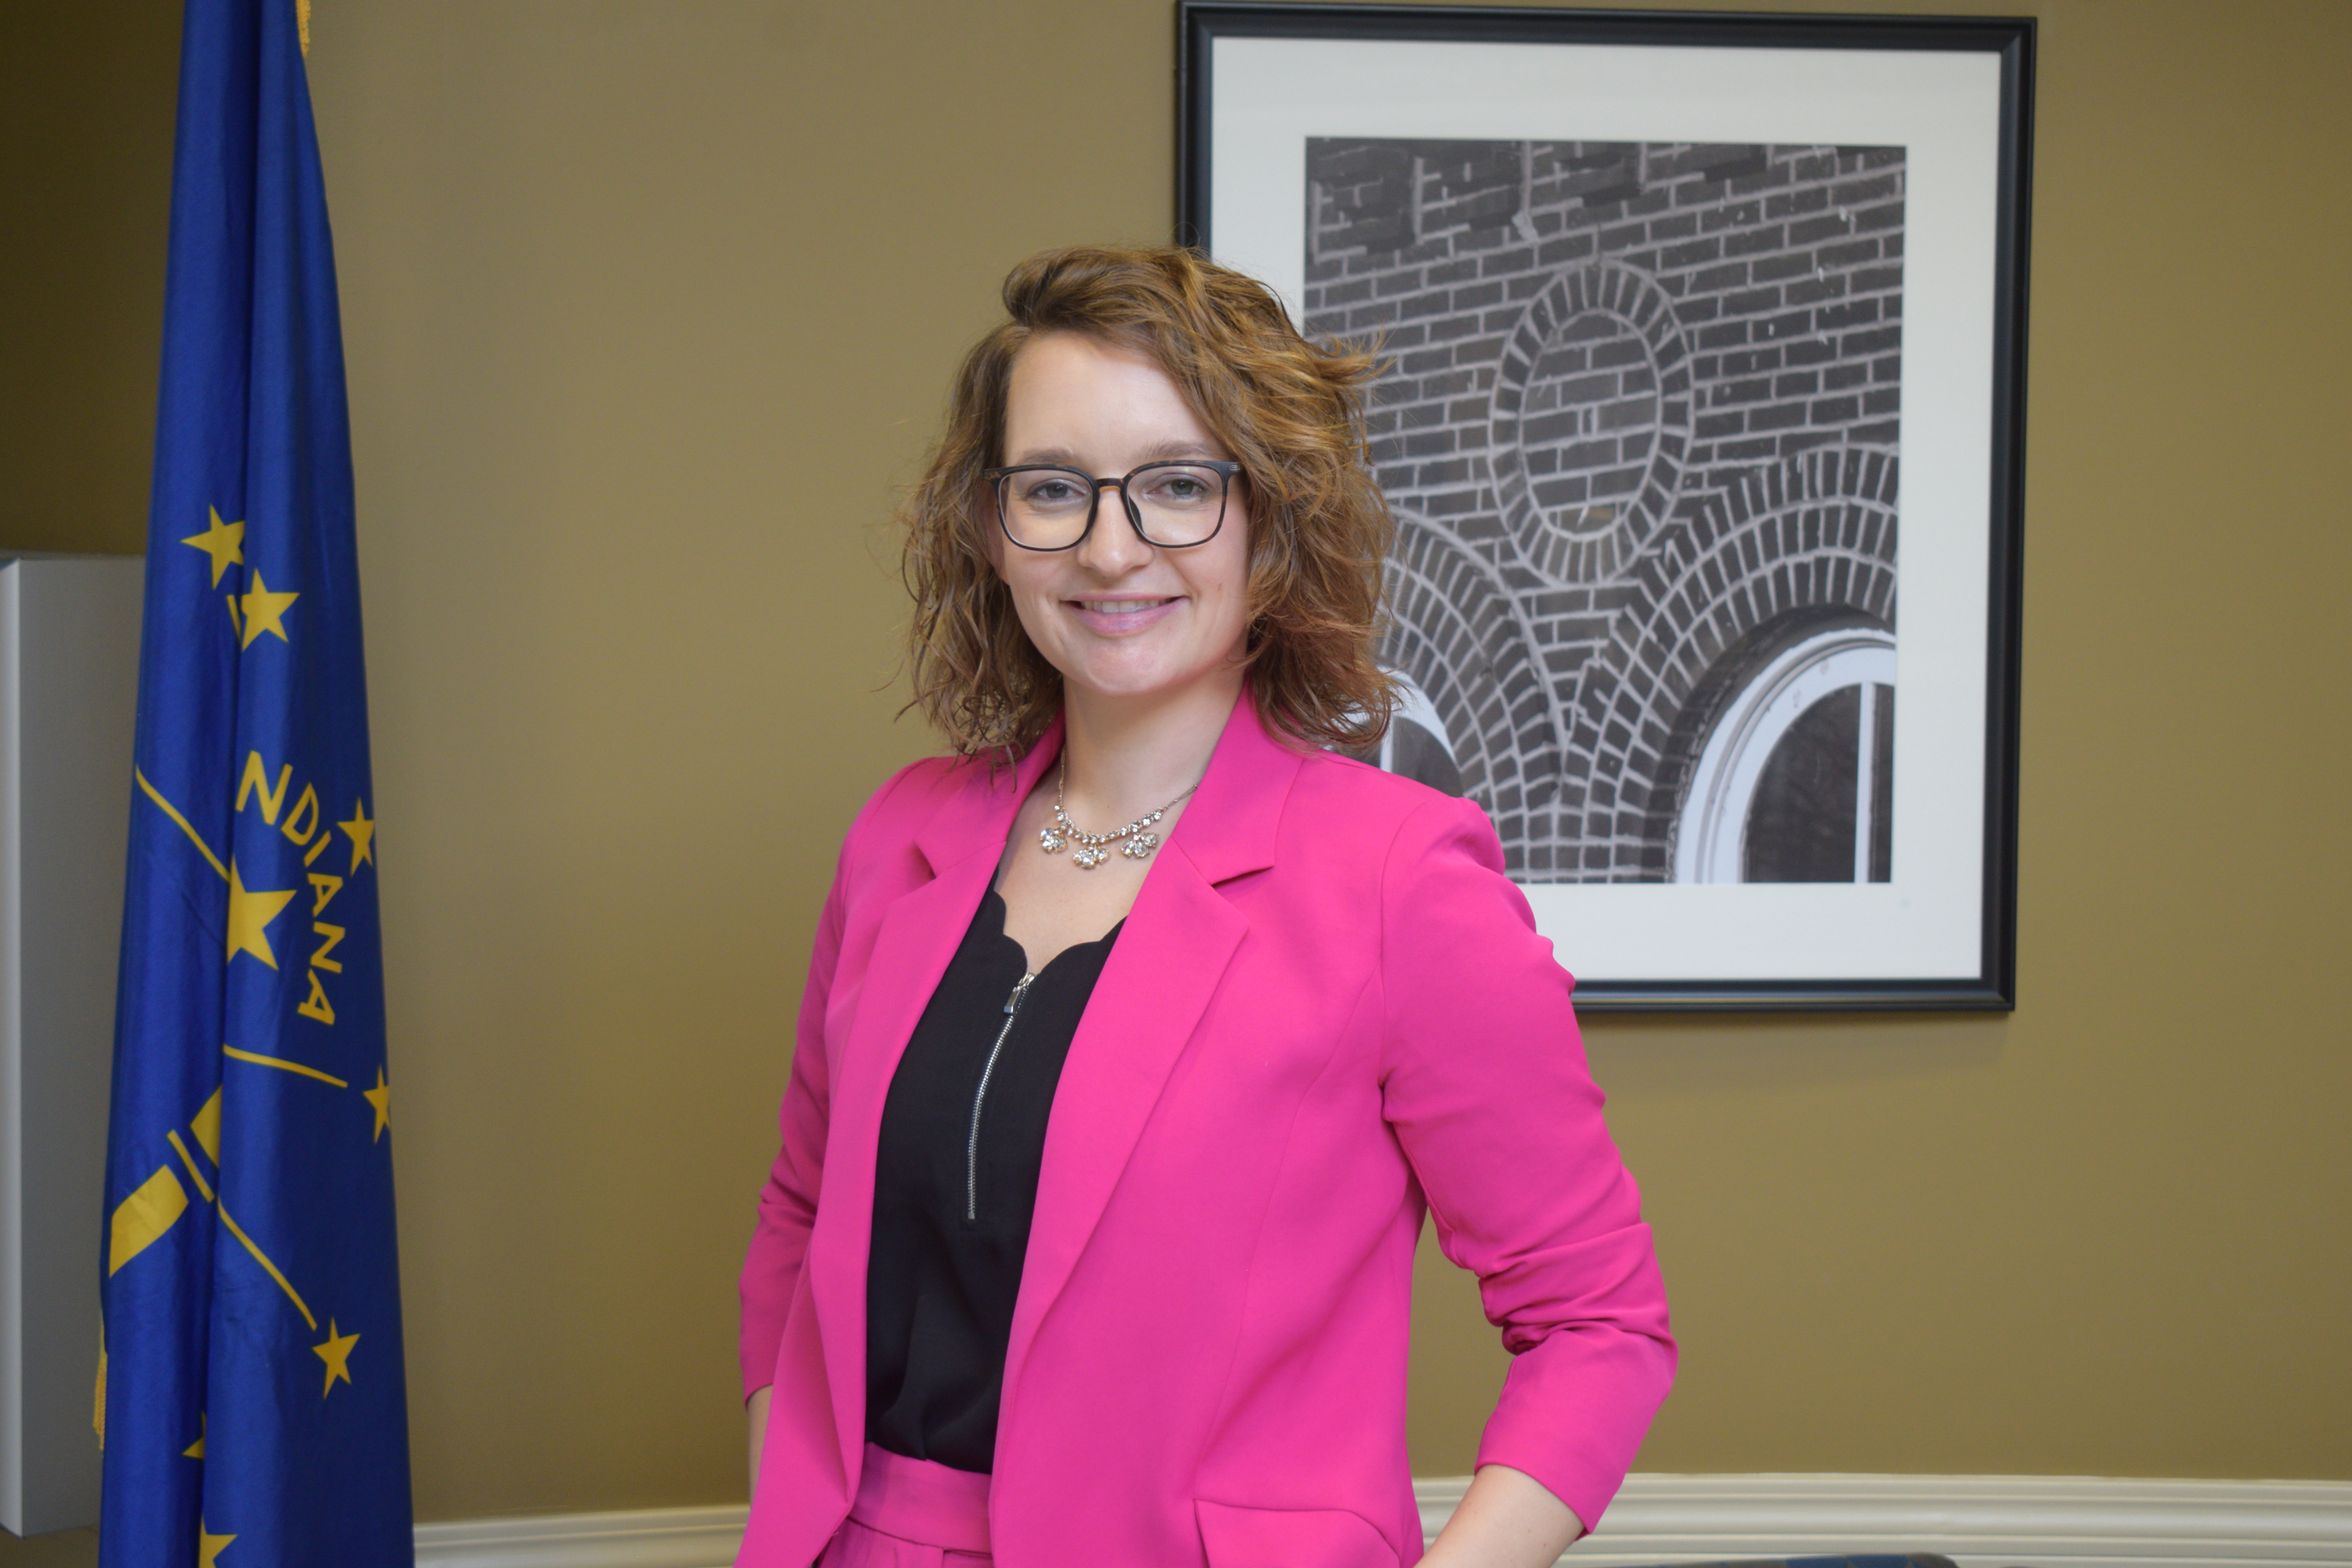 Sarah McLin wearing a pink suit, black blouse and glasses stands next to a State of Indiana flag with a framed piece of art behind her.